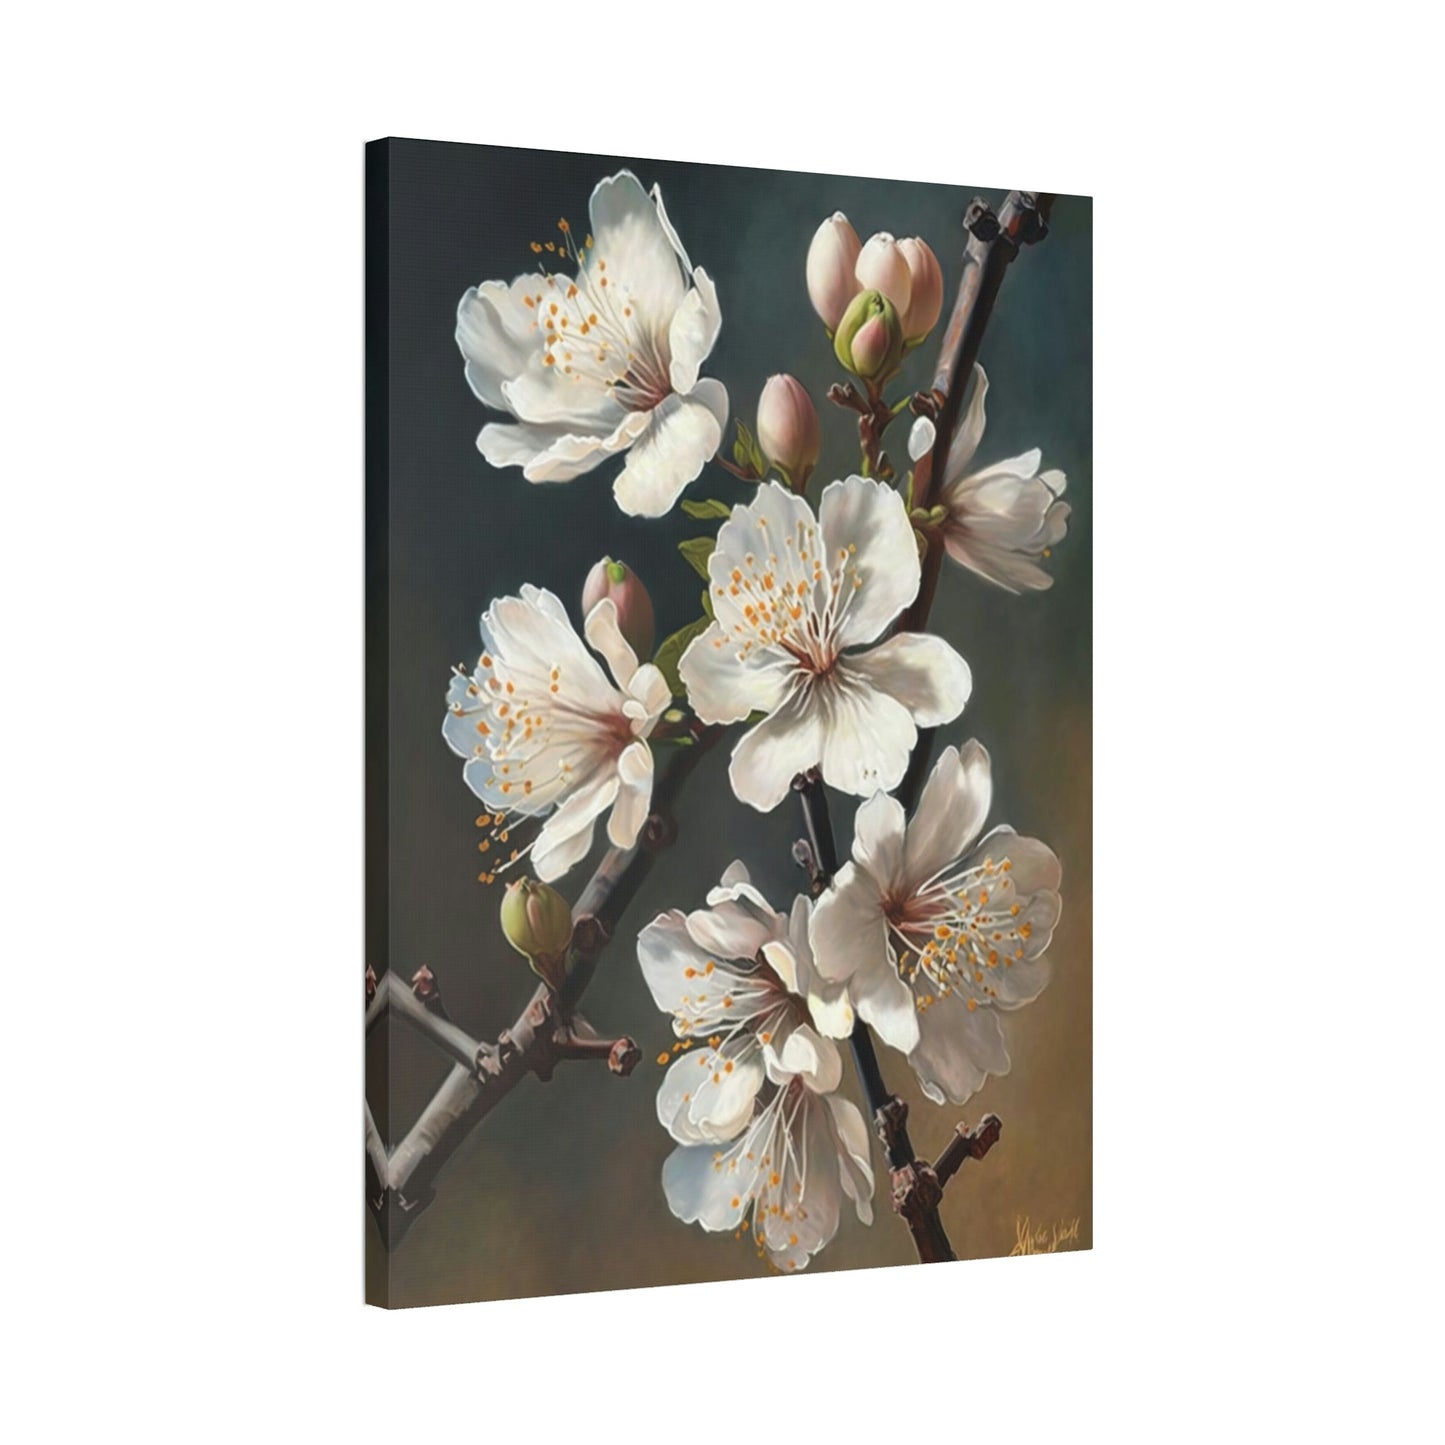 The Promise of Spring: Poster & Canvas Print of Blooming Almond Trees